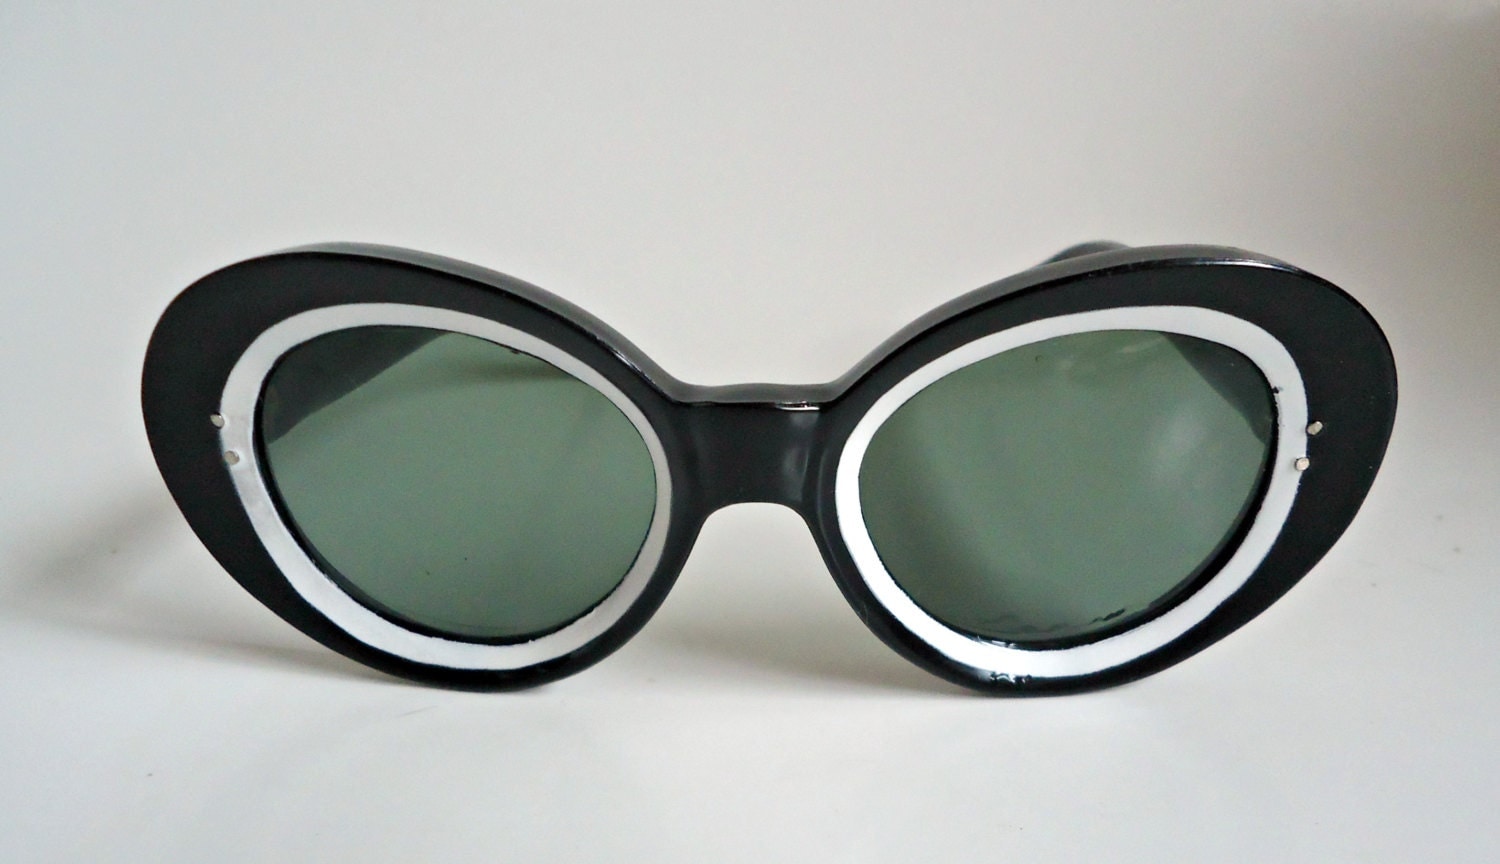 Vintage Sunglasses Groovy 1960s Black And By Treasurecoveally